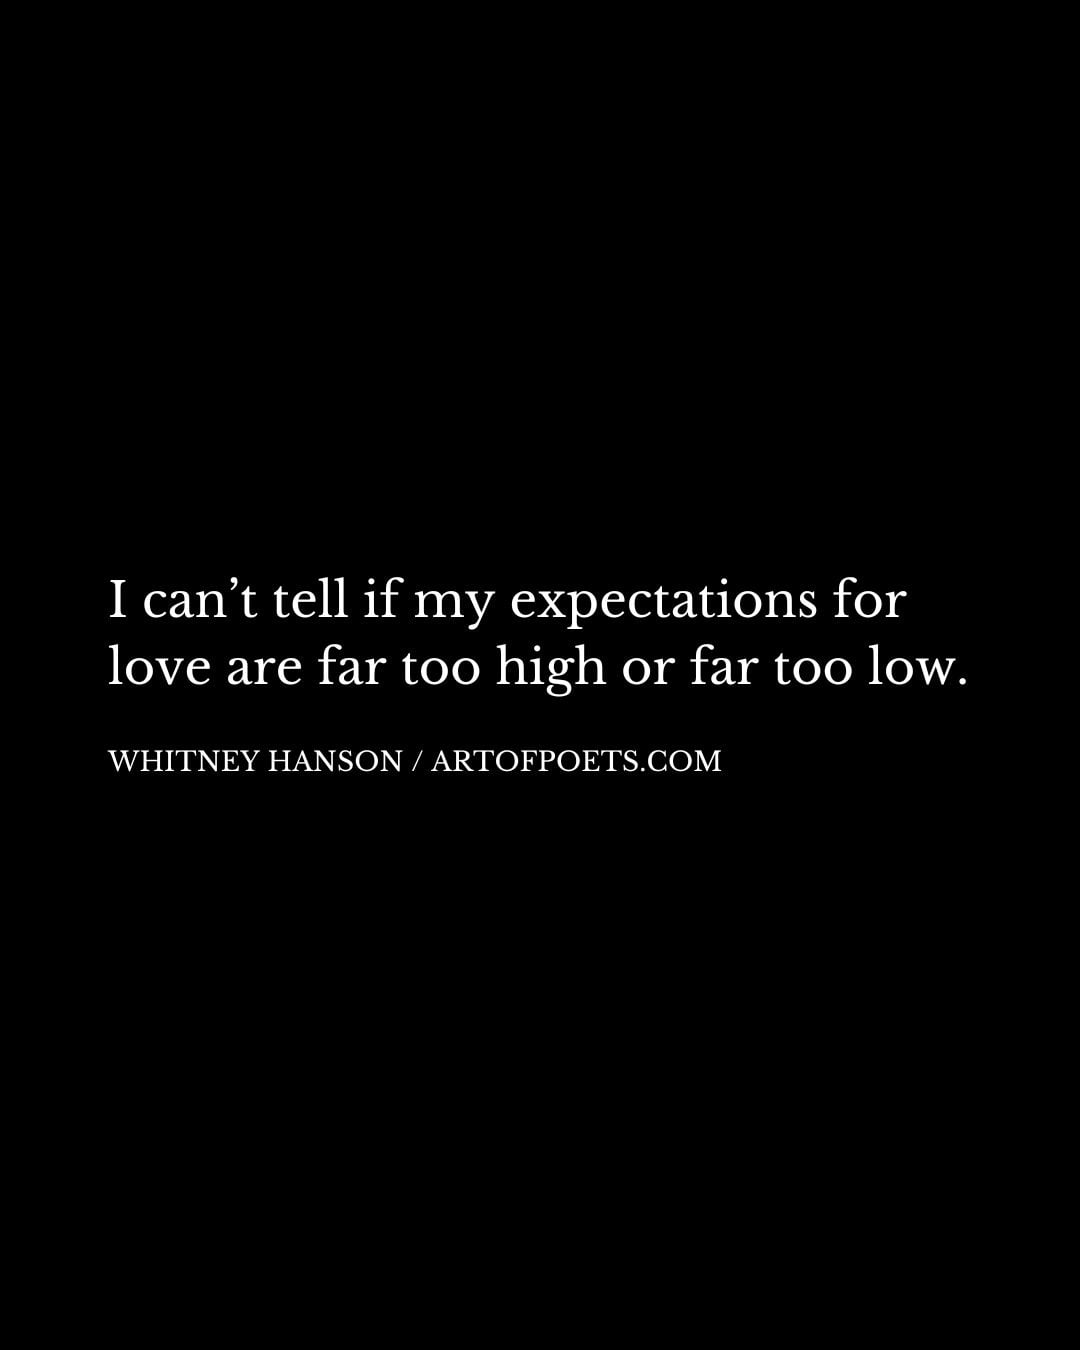 I cant tell if my expectations for love are far too high or far too low